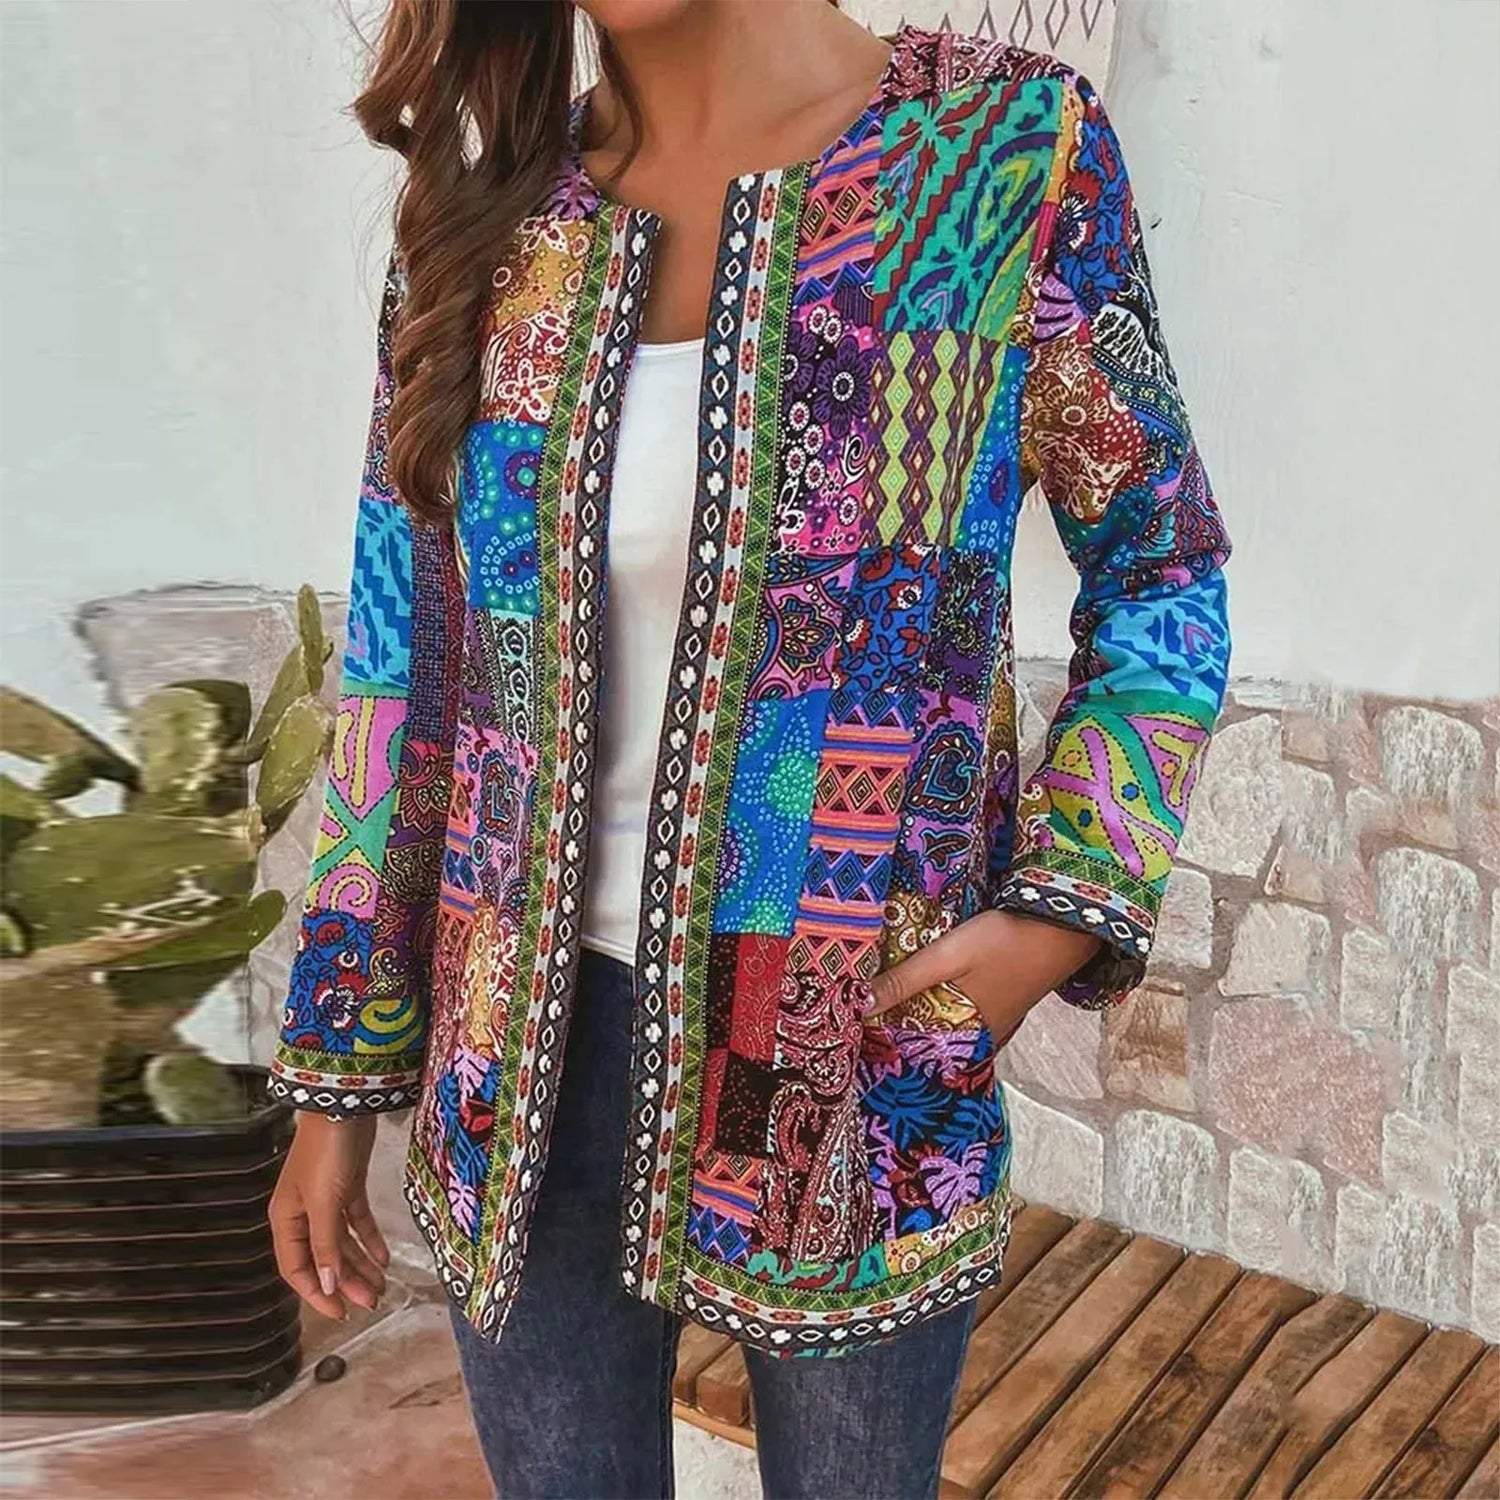 Boho Chic Floral Cardigan - Lightweight Long Sleeve Jacket with Pockets and Open Front | S-5XL - Purpletique